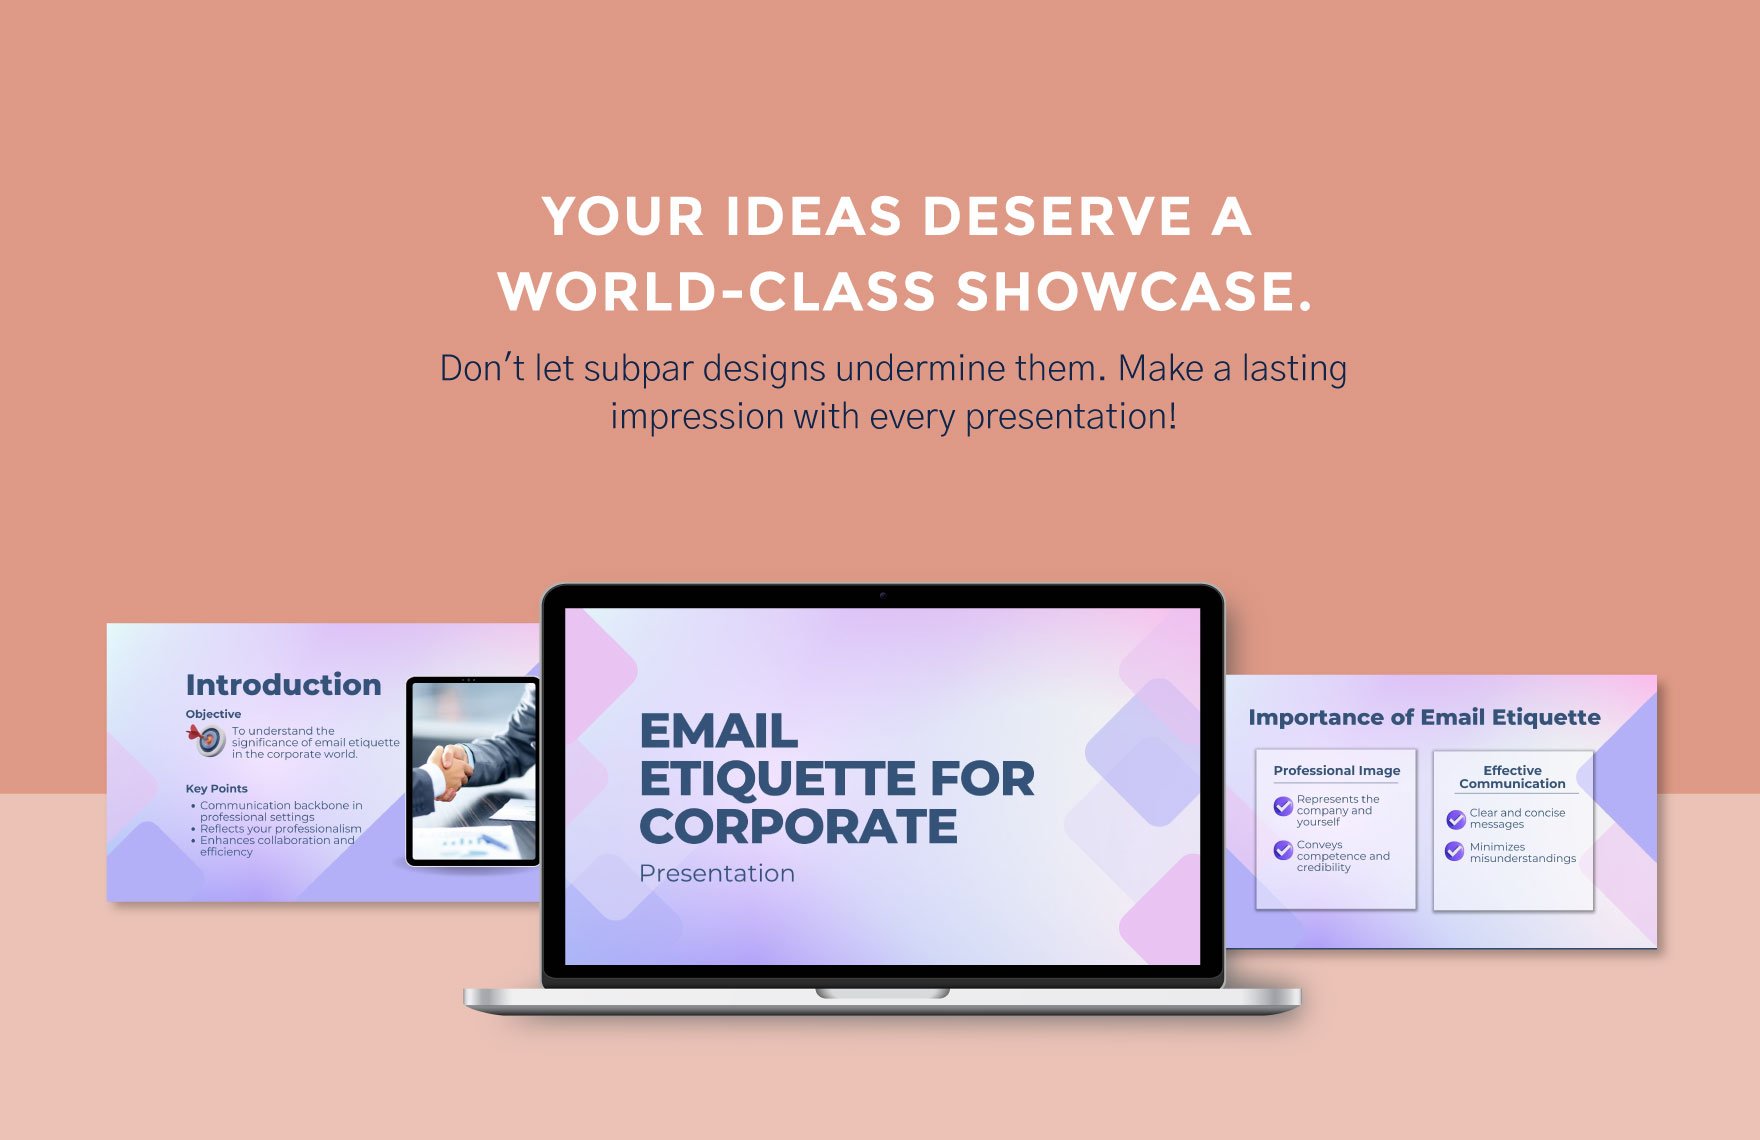 Email Etiquette for Corporate Template